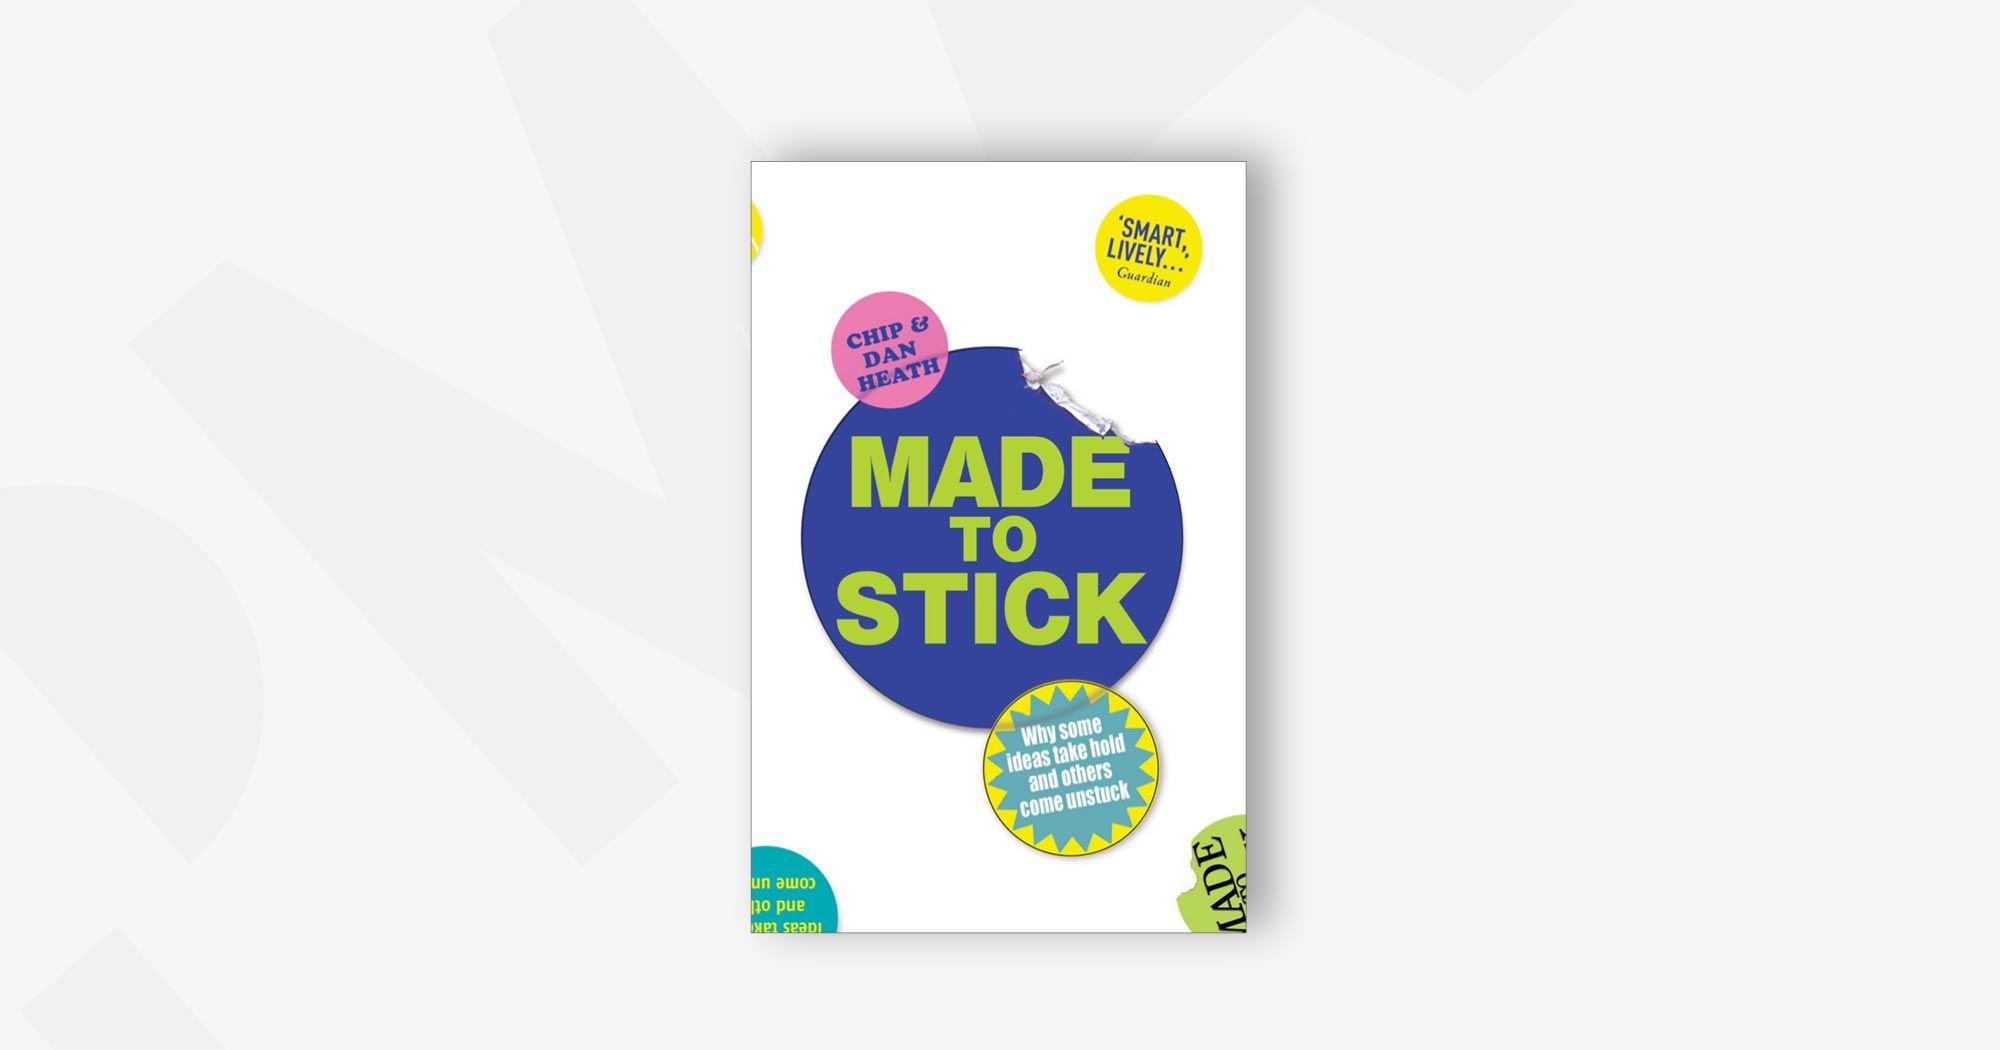 Made To Stick: Why some ideas take hold and others come unstuck – Chip & Dan Heath